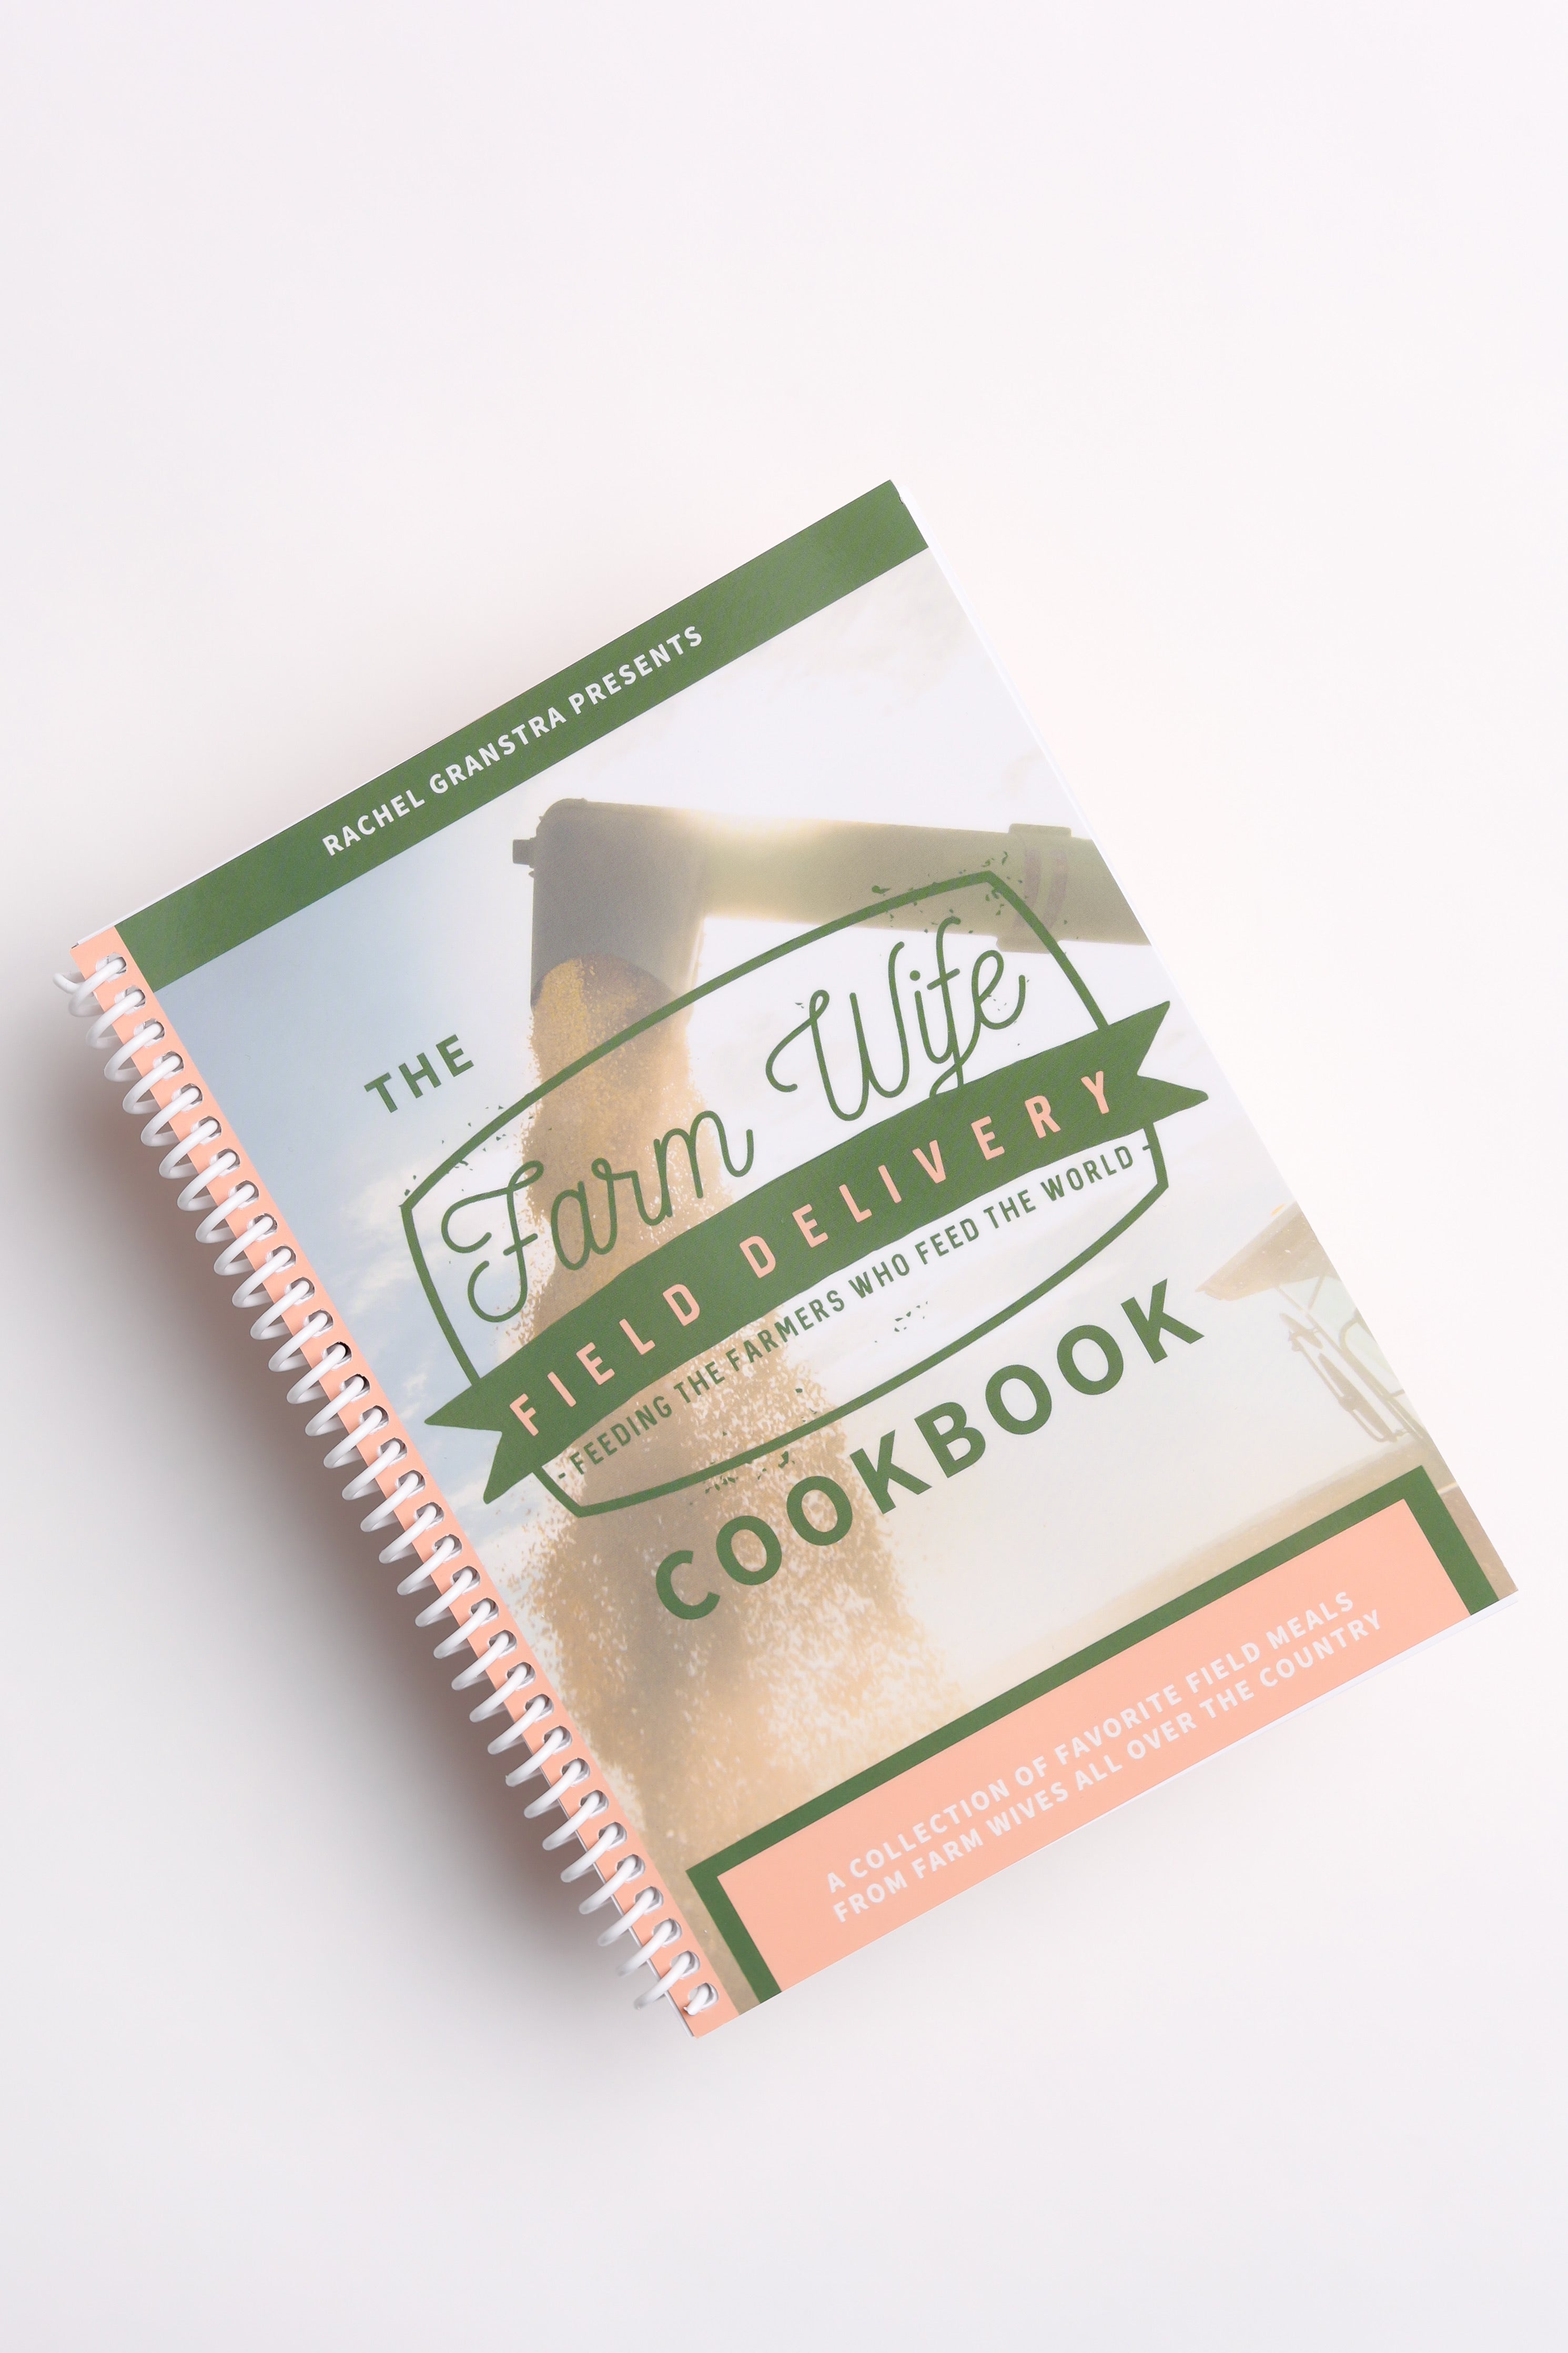 Farm Wife Field Delivery Cookbook displayed on white background